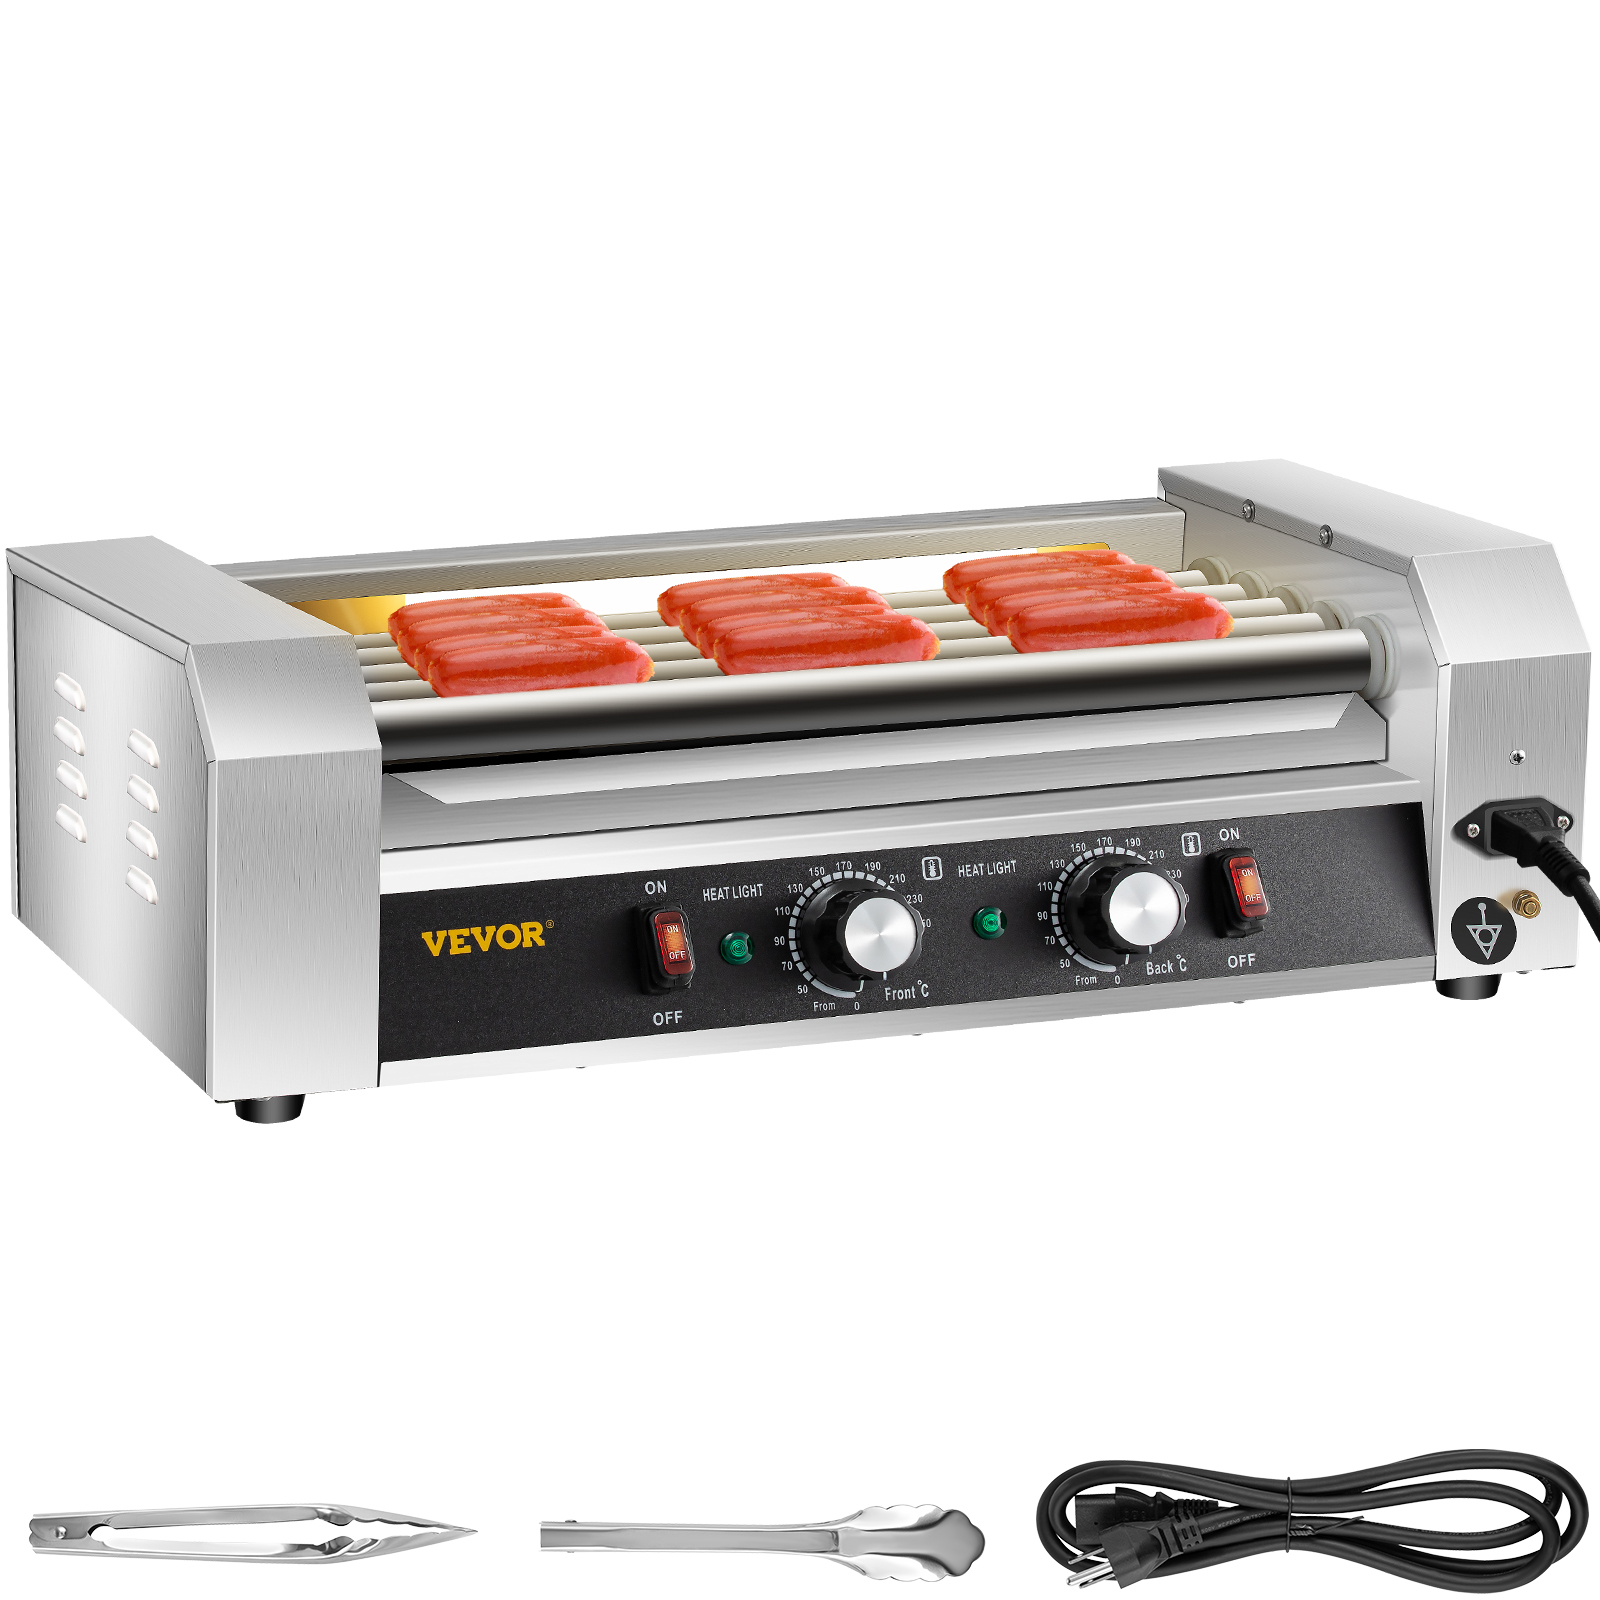 Silver Stainless Steel Automatic Grill Chicken Machine, For Restaurant,  Size: 5.5 Feet